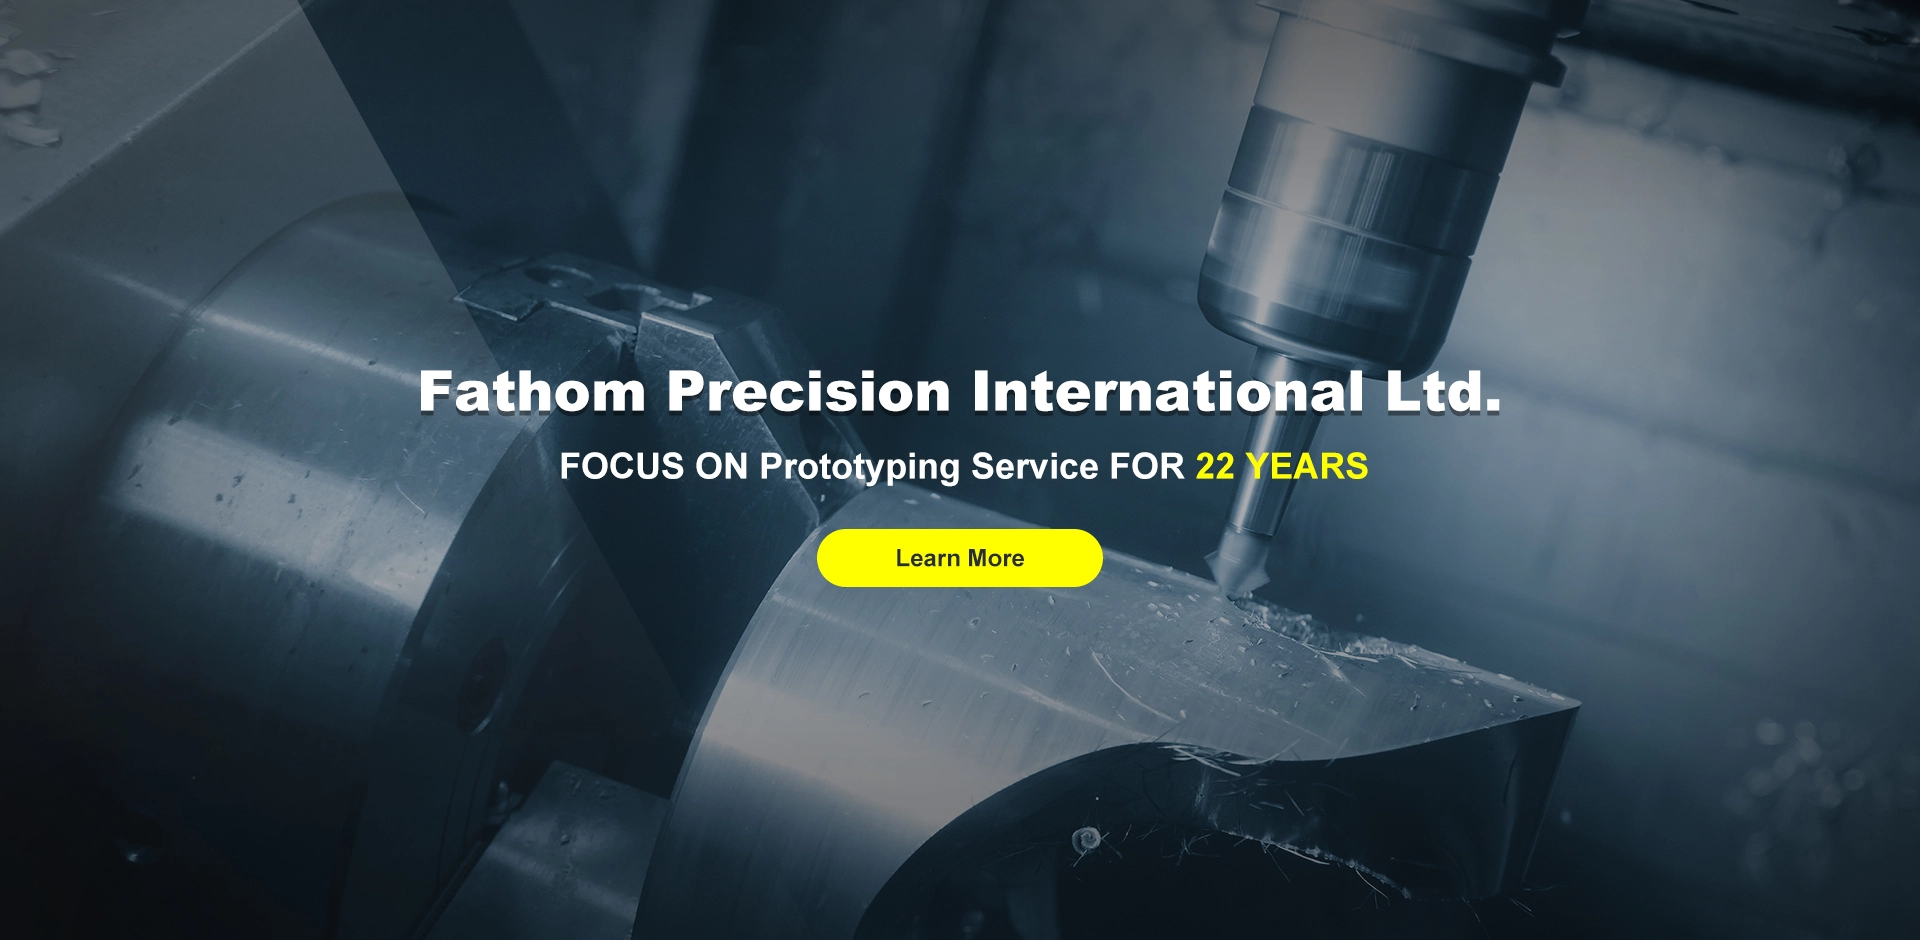 FOCUS ON Rapid Prototyping Service FOR 22 YEARS